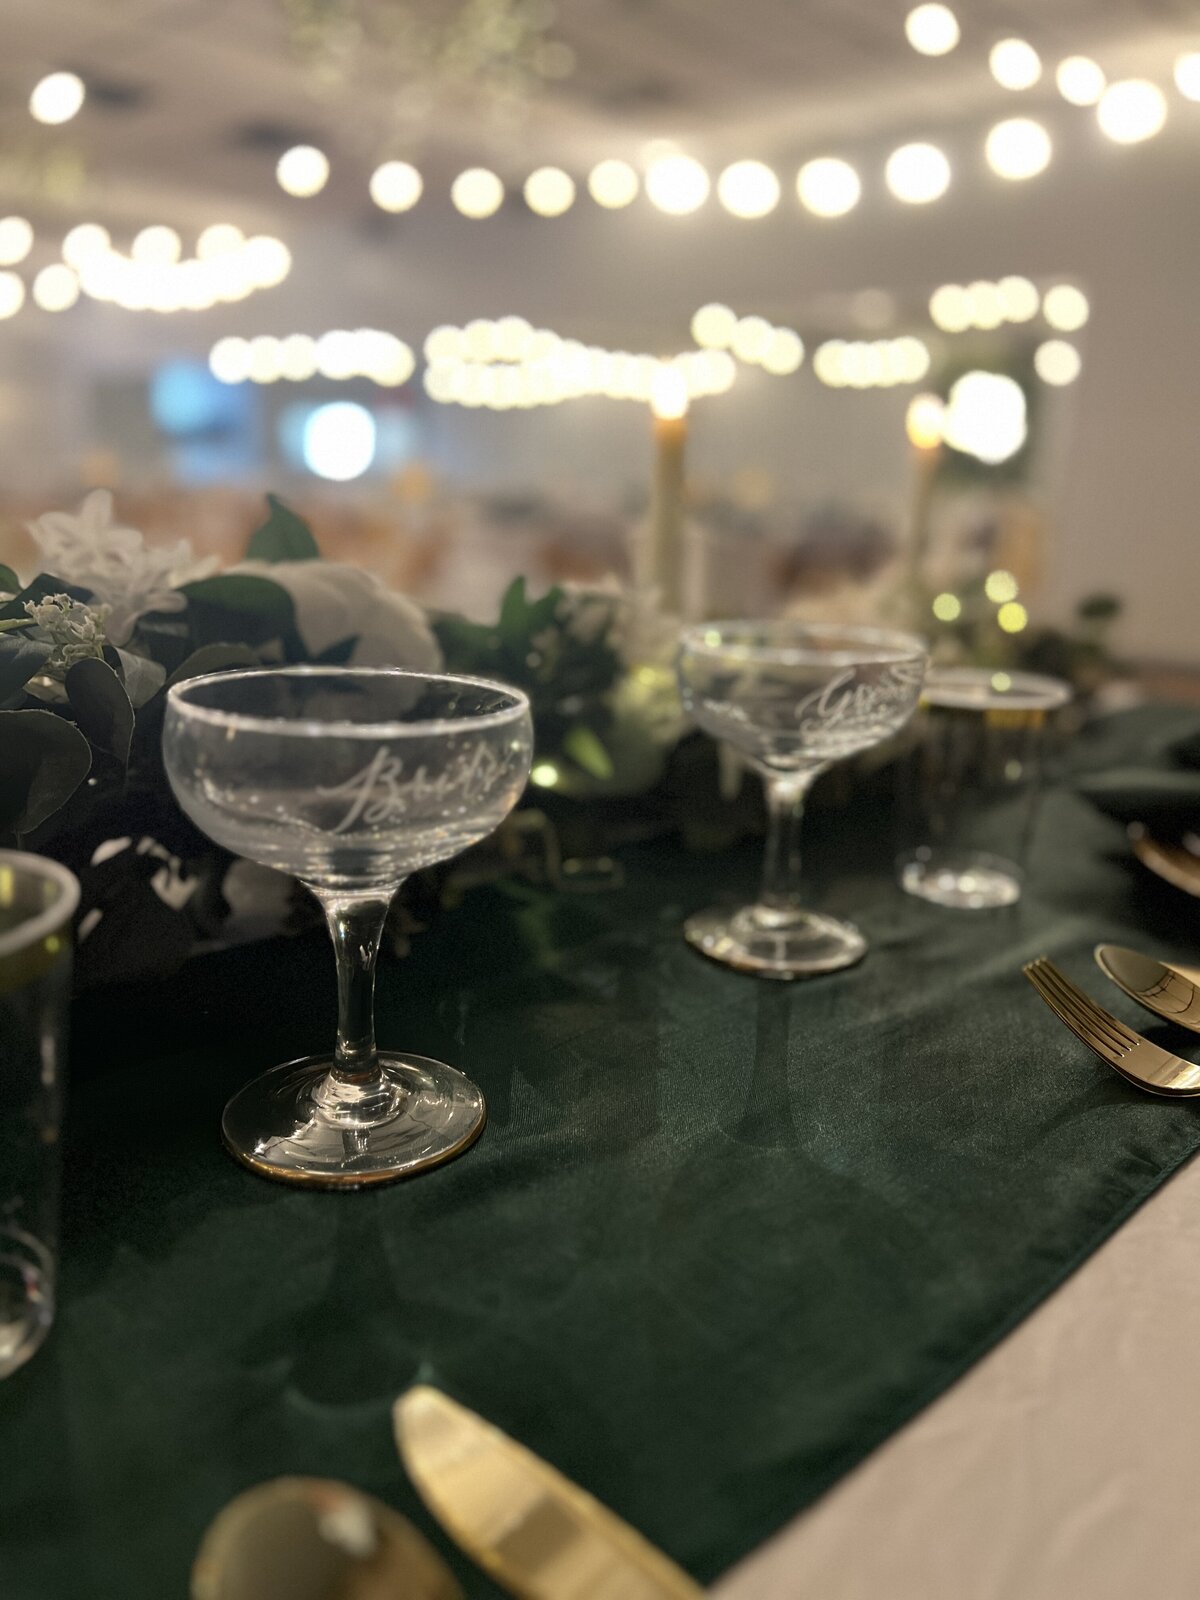 Custom glass martini glasses for the bride and groom, included in our decor packages and affordable venue packages at The District Clearwater event venue - Raise a toast in style on your special day